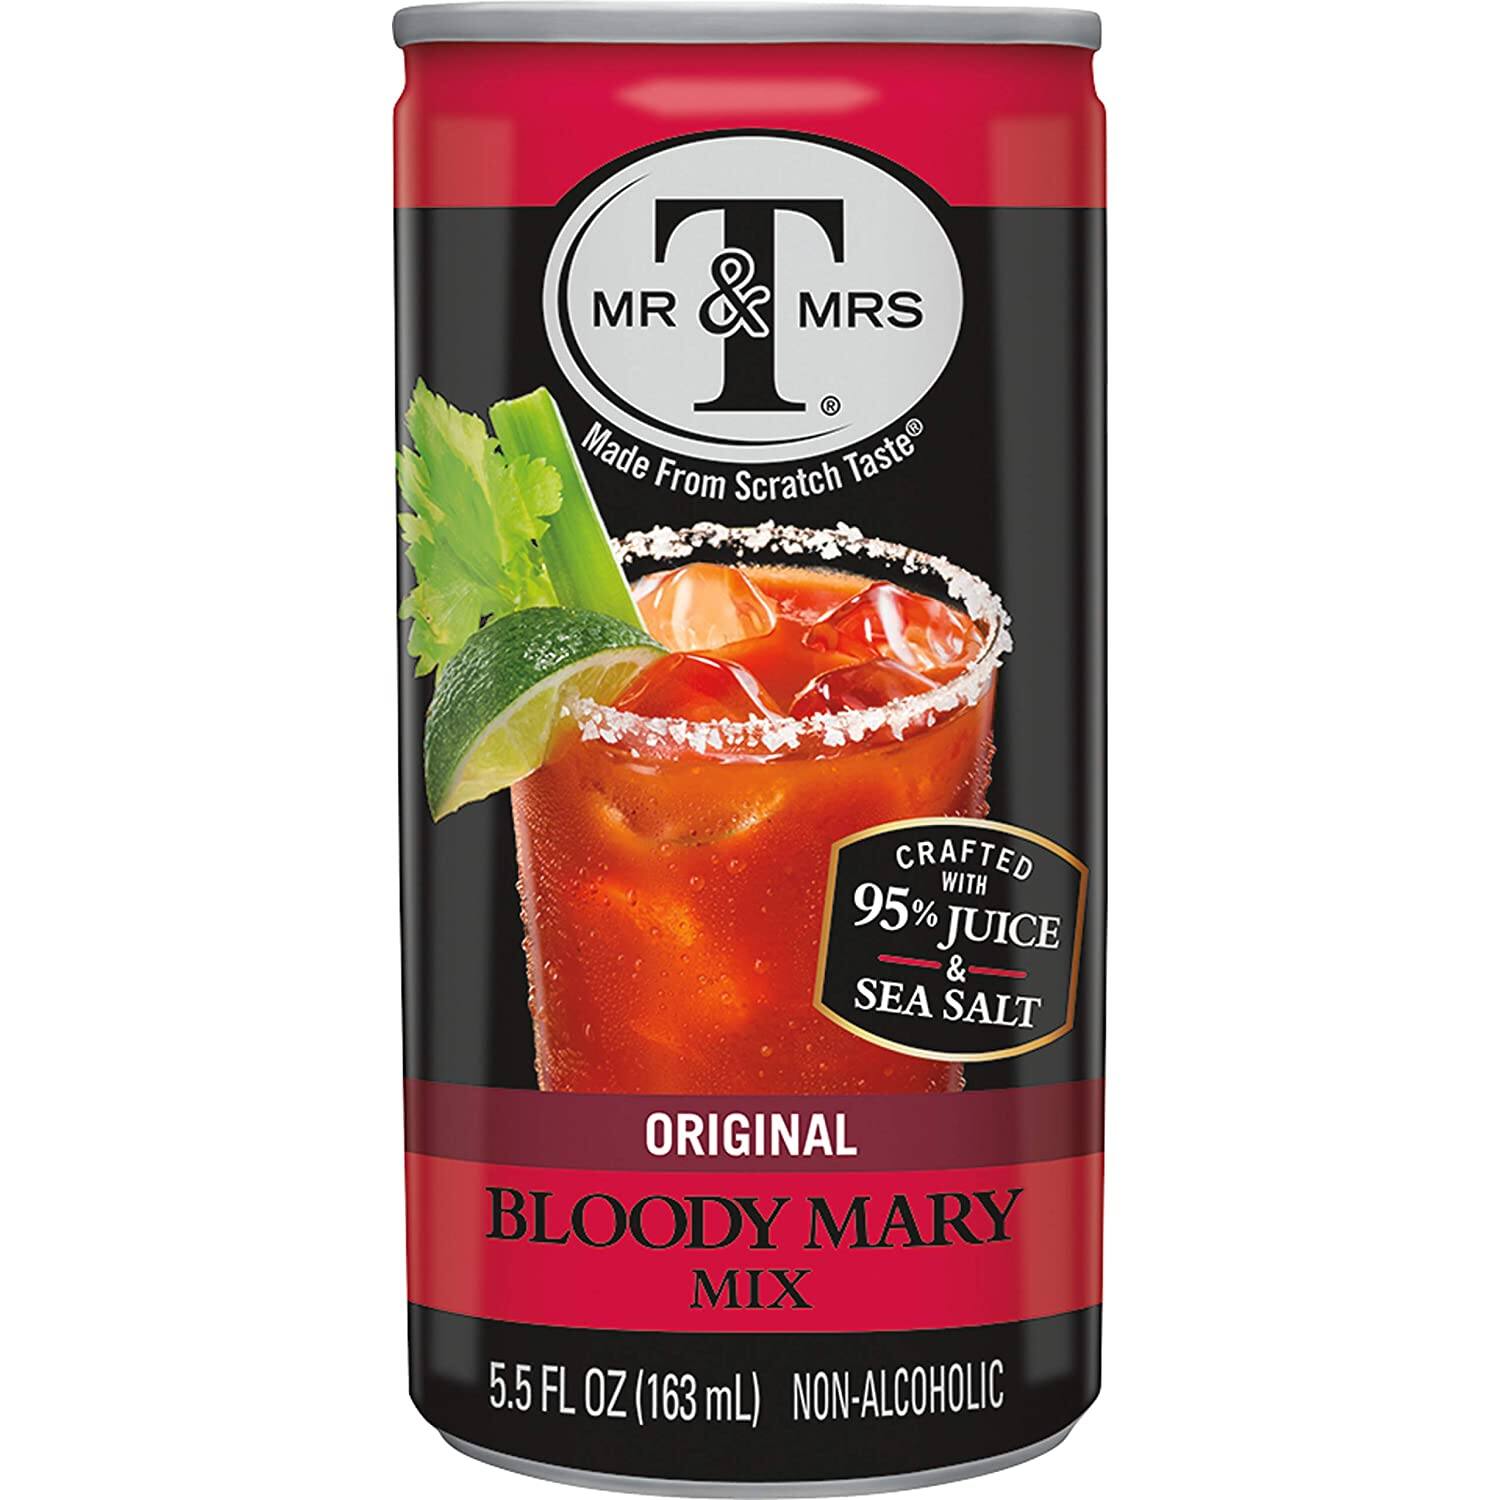 24-Cans 5.5-Oz Mr & Mrs T Bloody Mary Mix (Original) $10.50 + Free Shipping w/ Prime or $25+